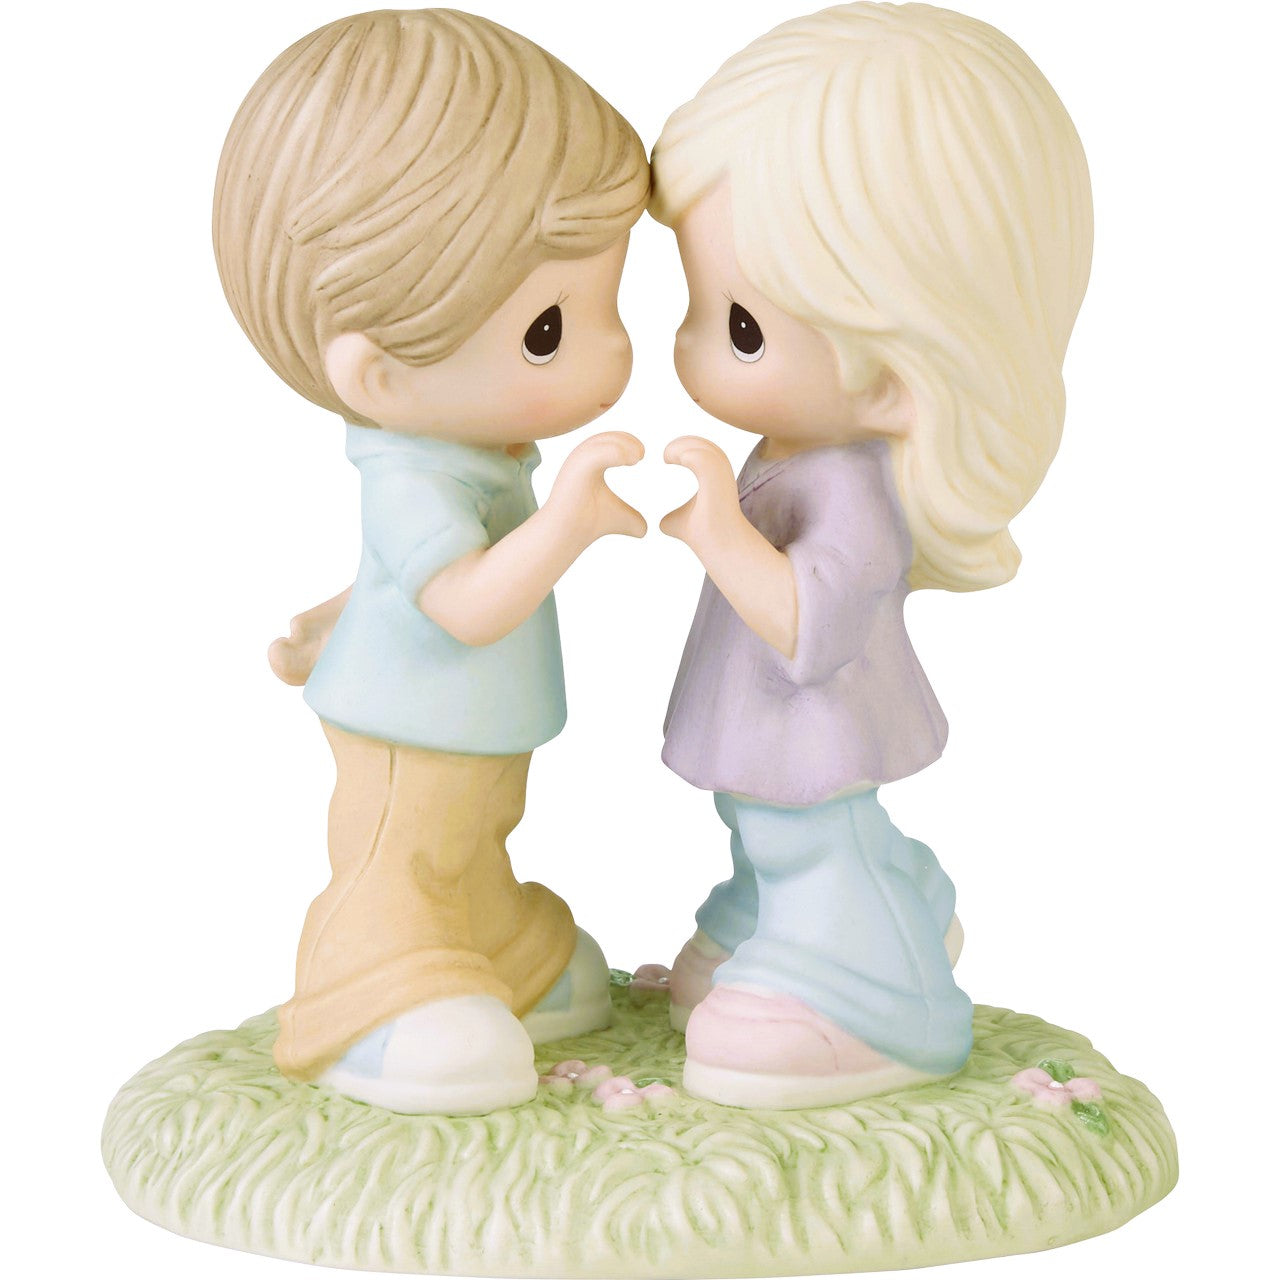 Precious Moments Love Will Keep us Together Porcelain Statue 5.5"tall X 5"wide X 3.8"deep